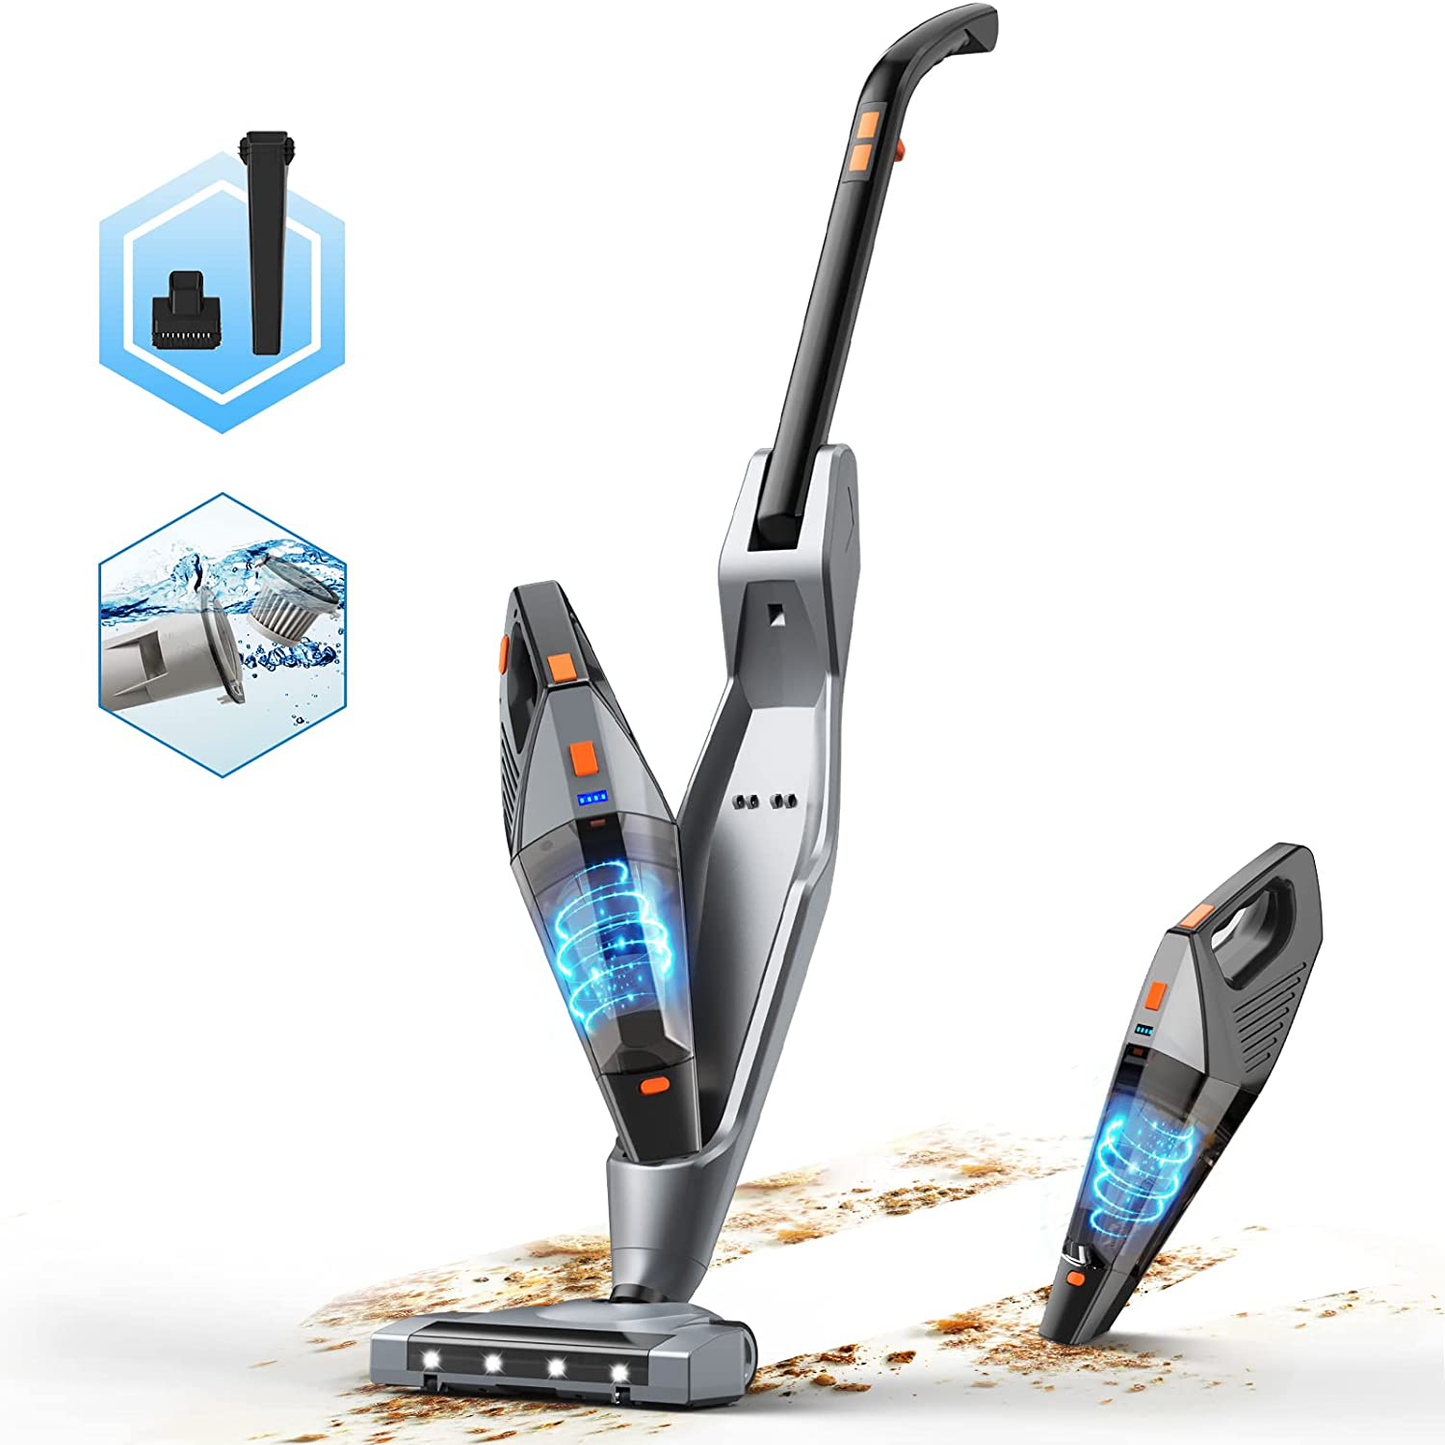 Wet Dry Cordless-Vacuum Cleaner-Lightweight-Powerful Floor-Cleaning - 2 in 1/ 16Kpa Handheld Vacuum with Washable HEPA Filter Portable for Home,Pet Hair,Carpet